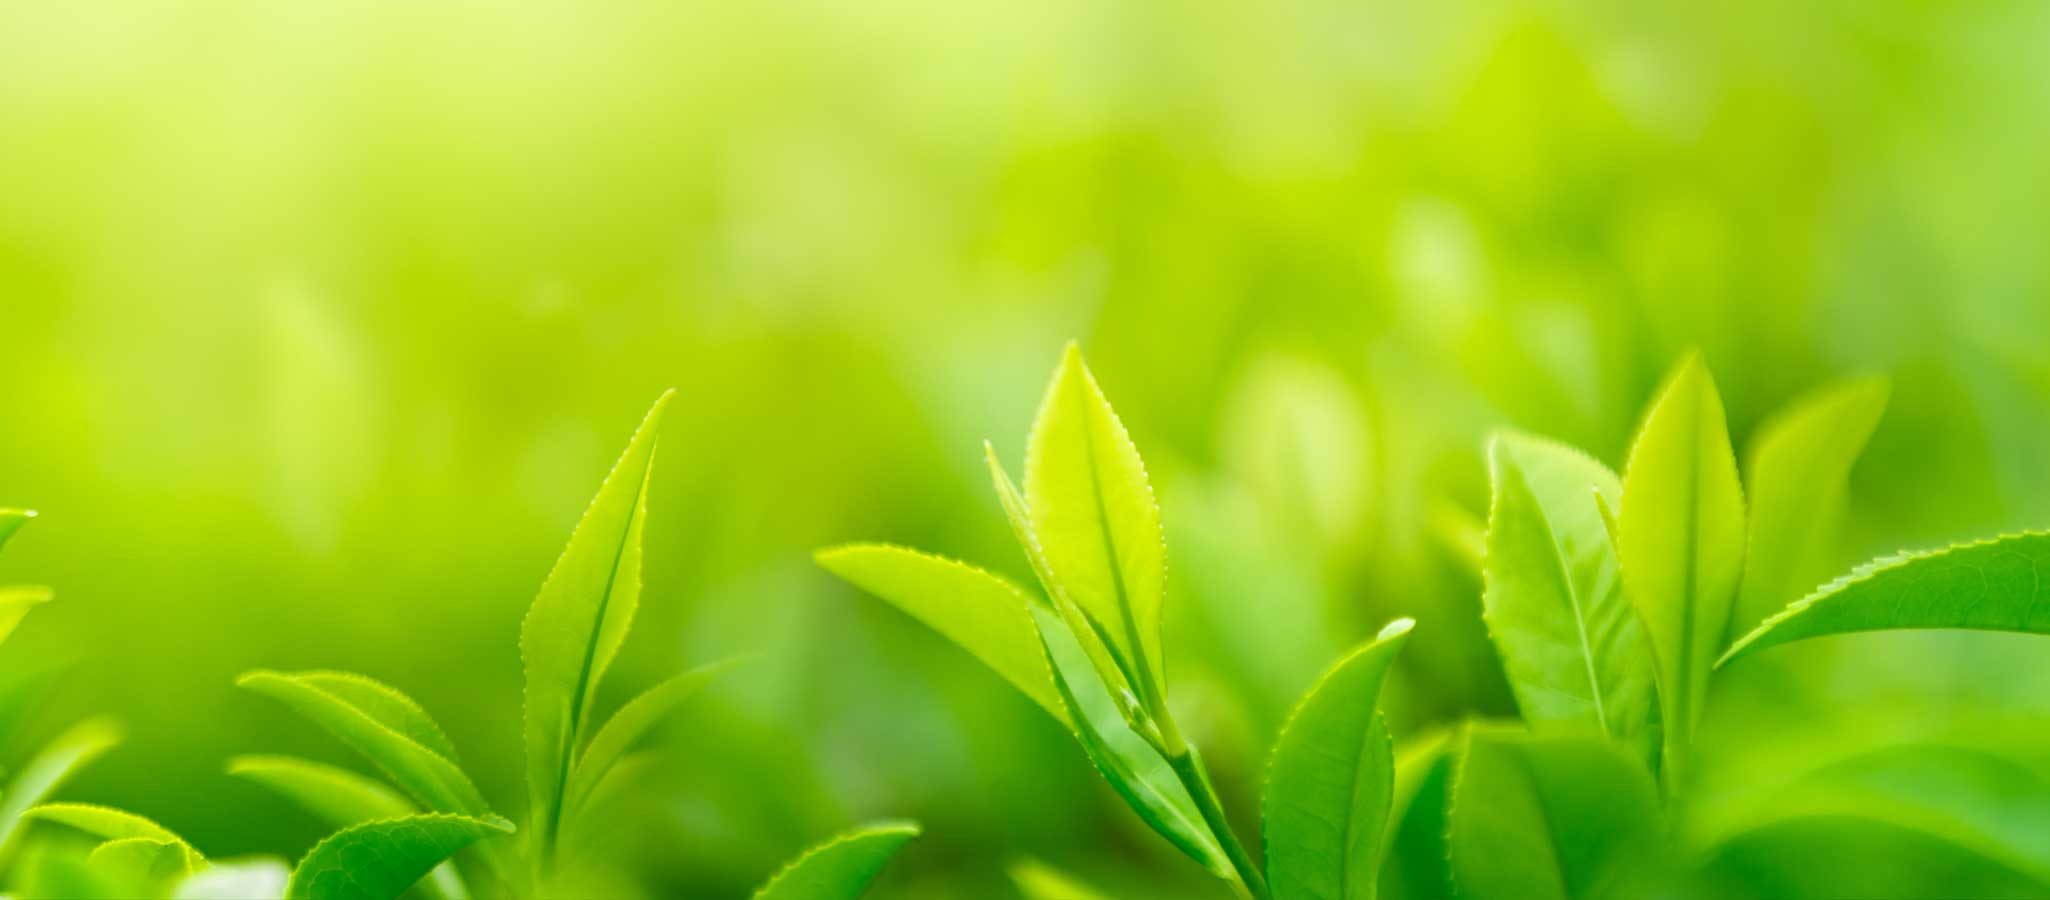 A close up photo of a verdant green plant in a wild field